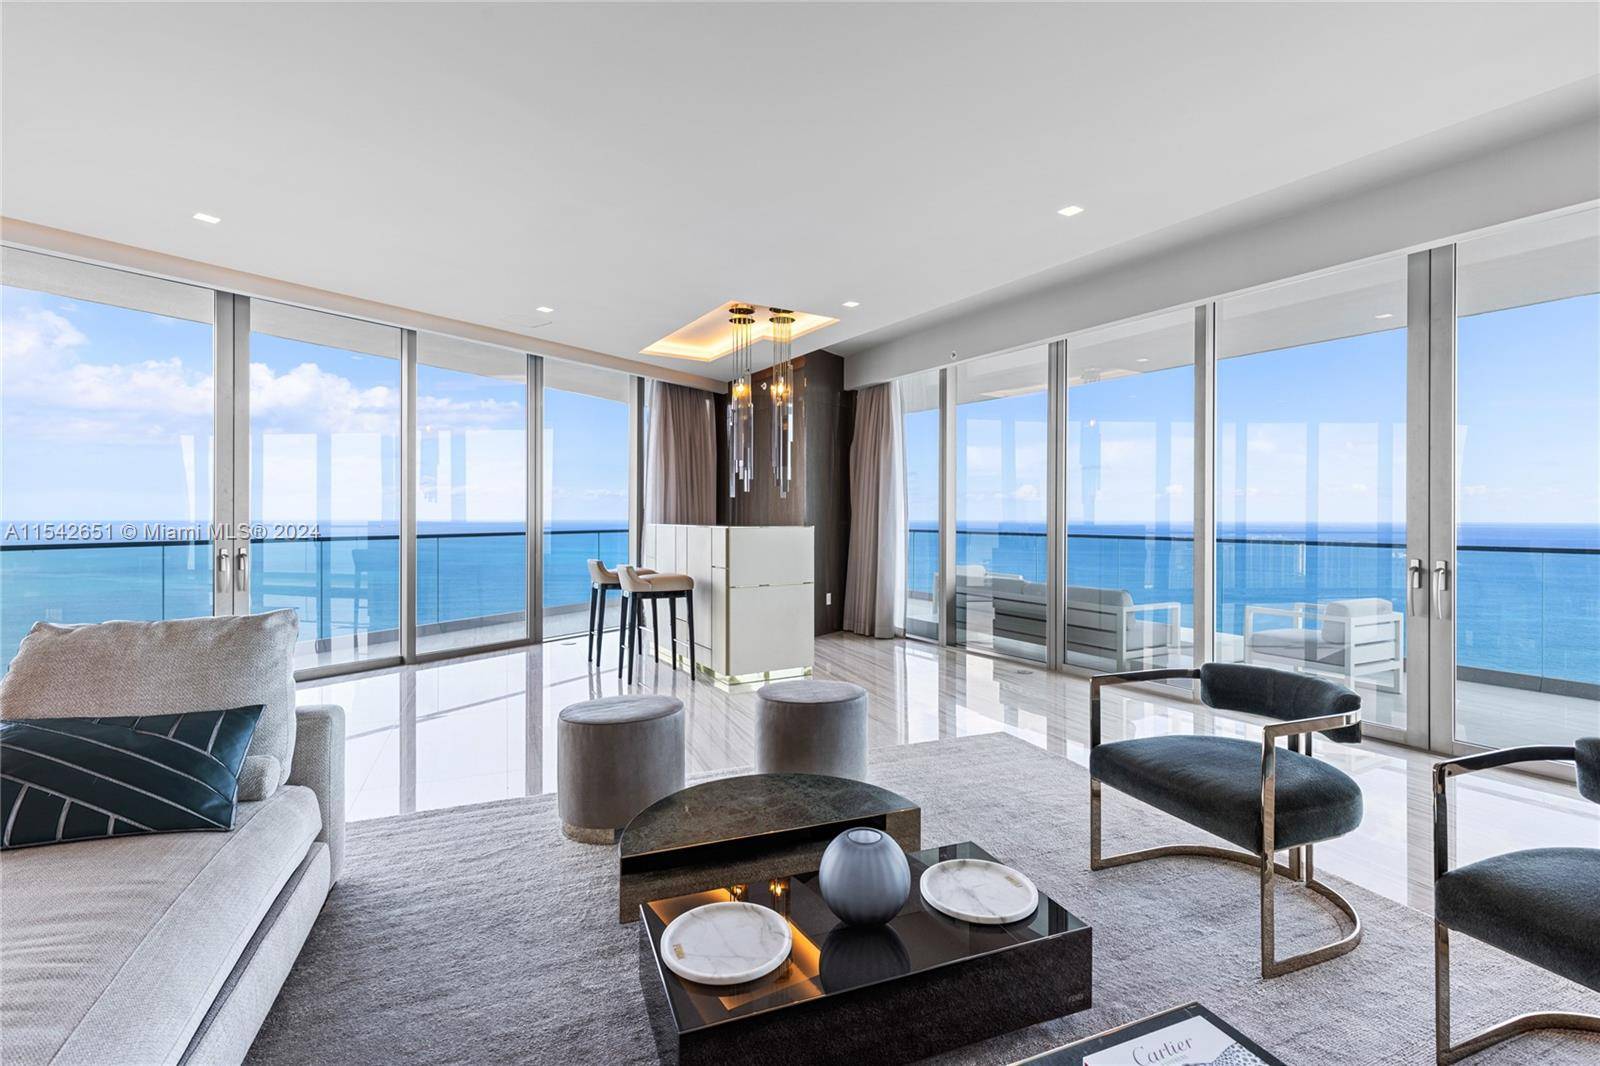 WELCOME TO THE MOST DESIRED SKY HOME AT ARMANI CASA RESIDENCES Supreme Ultra Luxury Professional Design and Finishes.